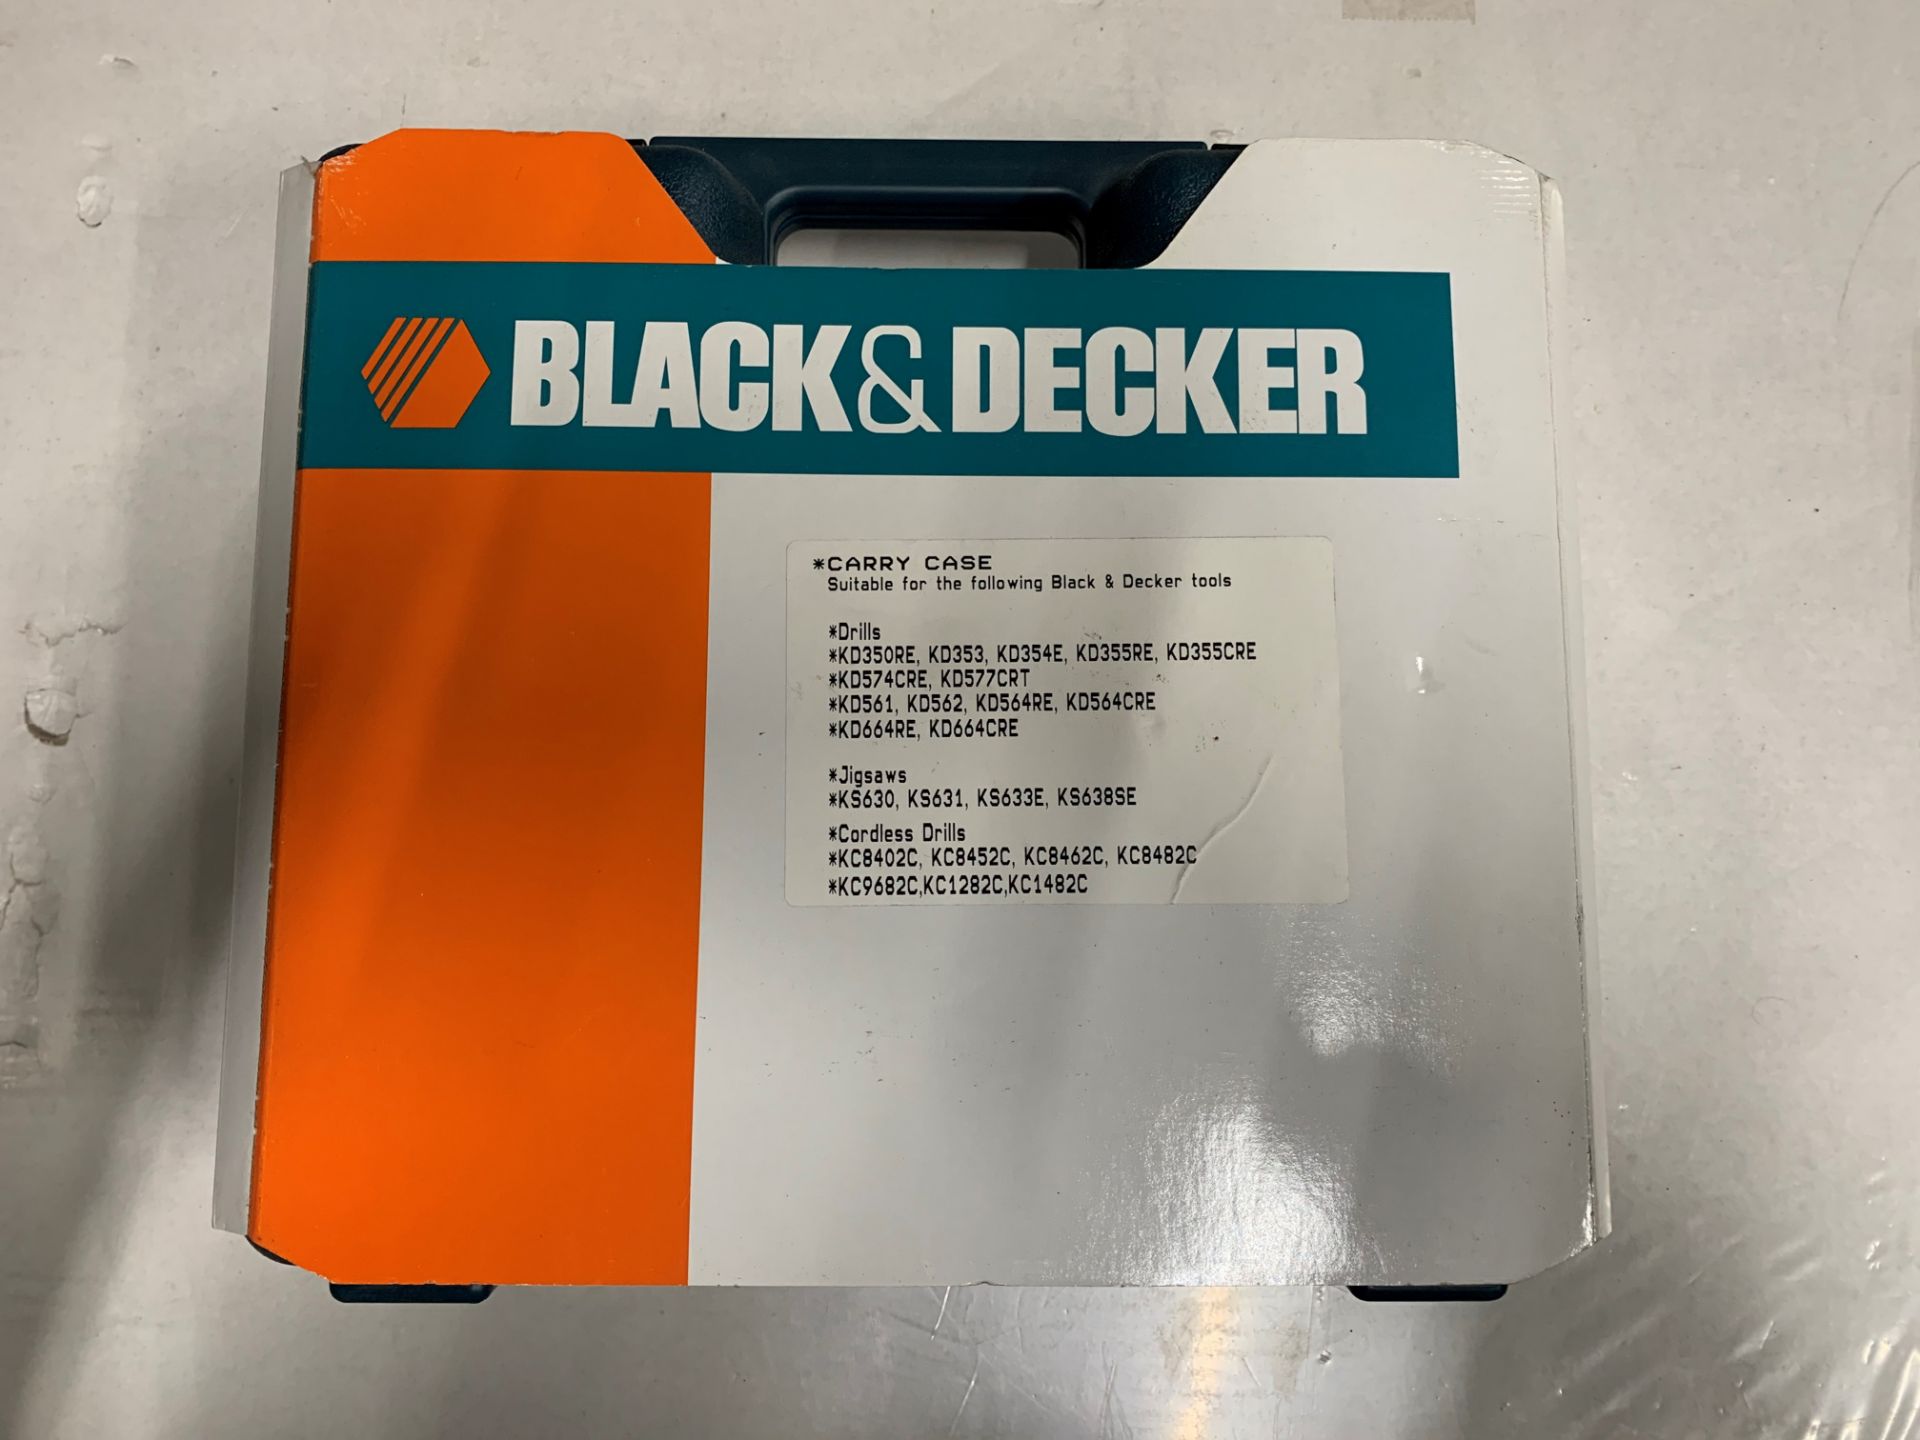 6 x Empty black & decker drill/carry cases - Image 2 of 3